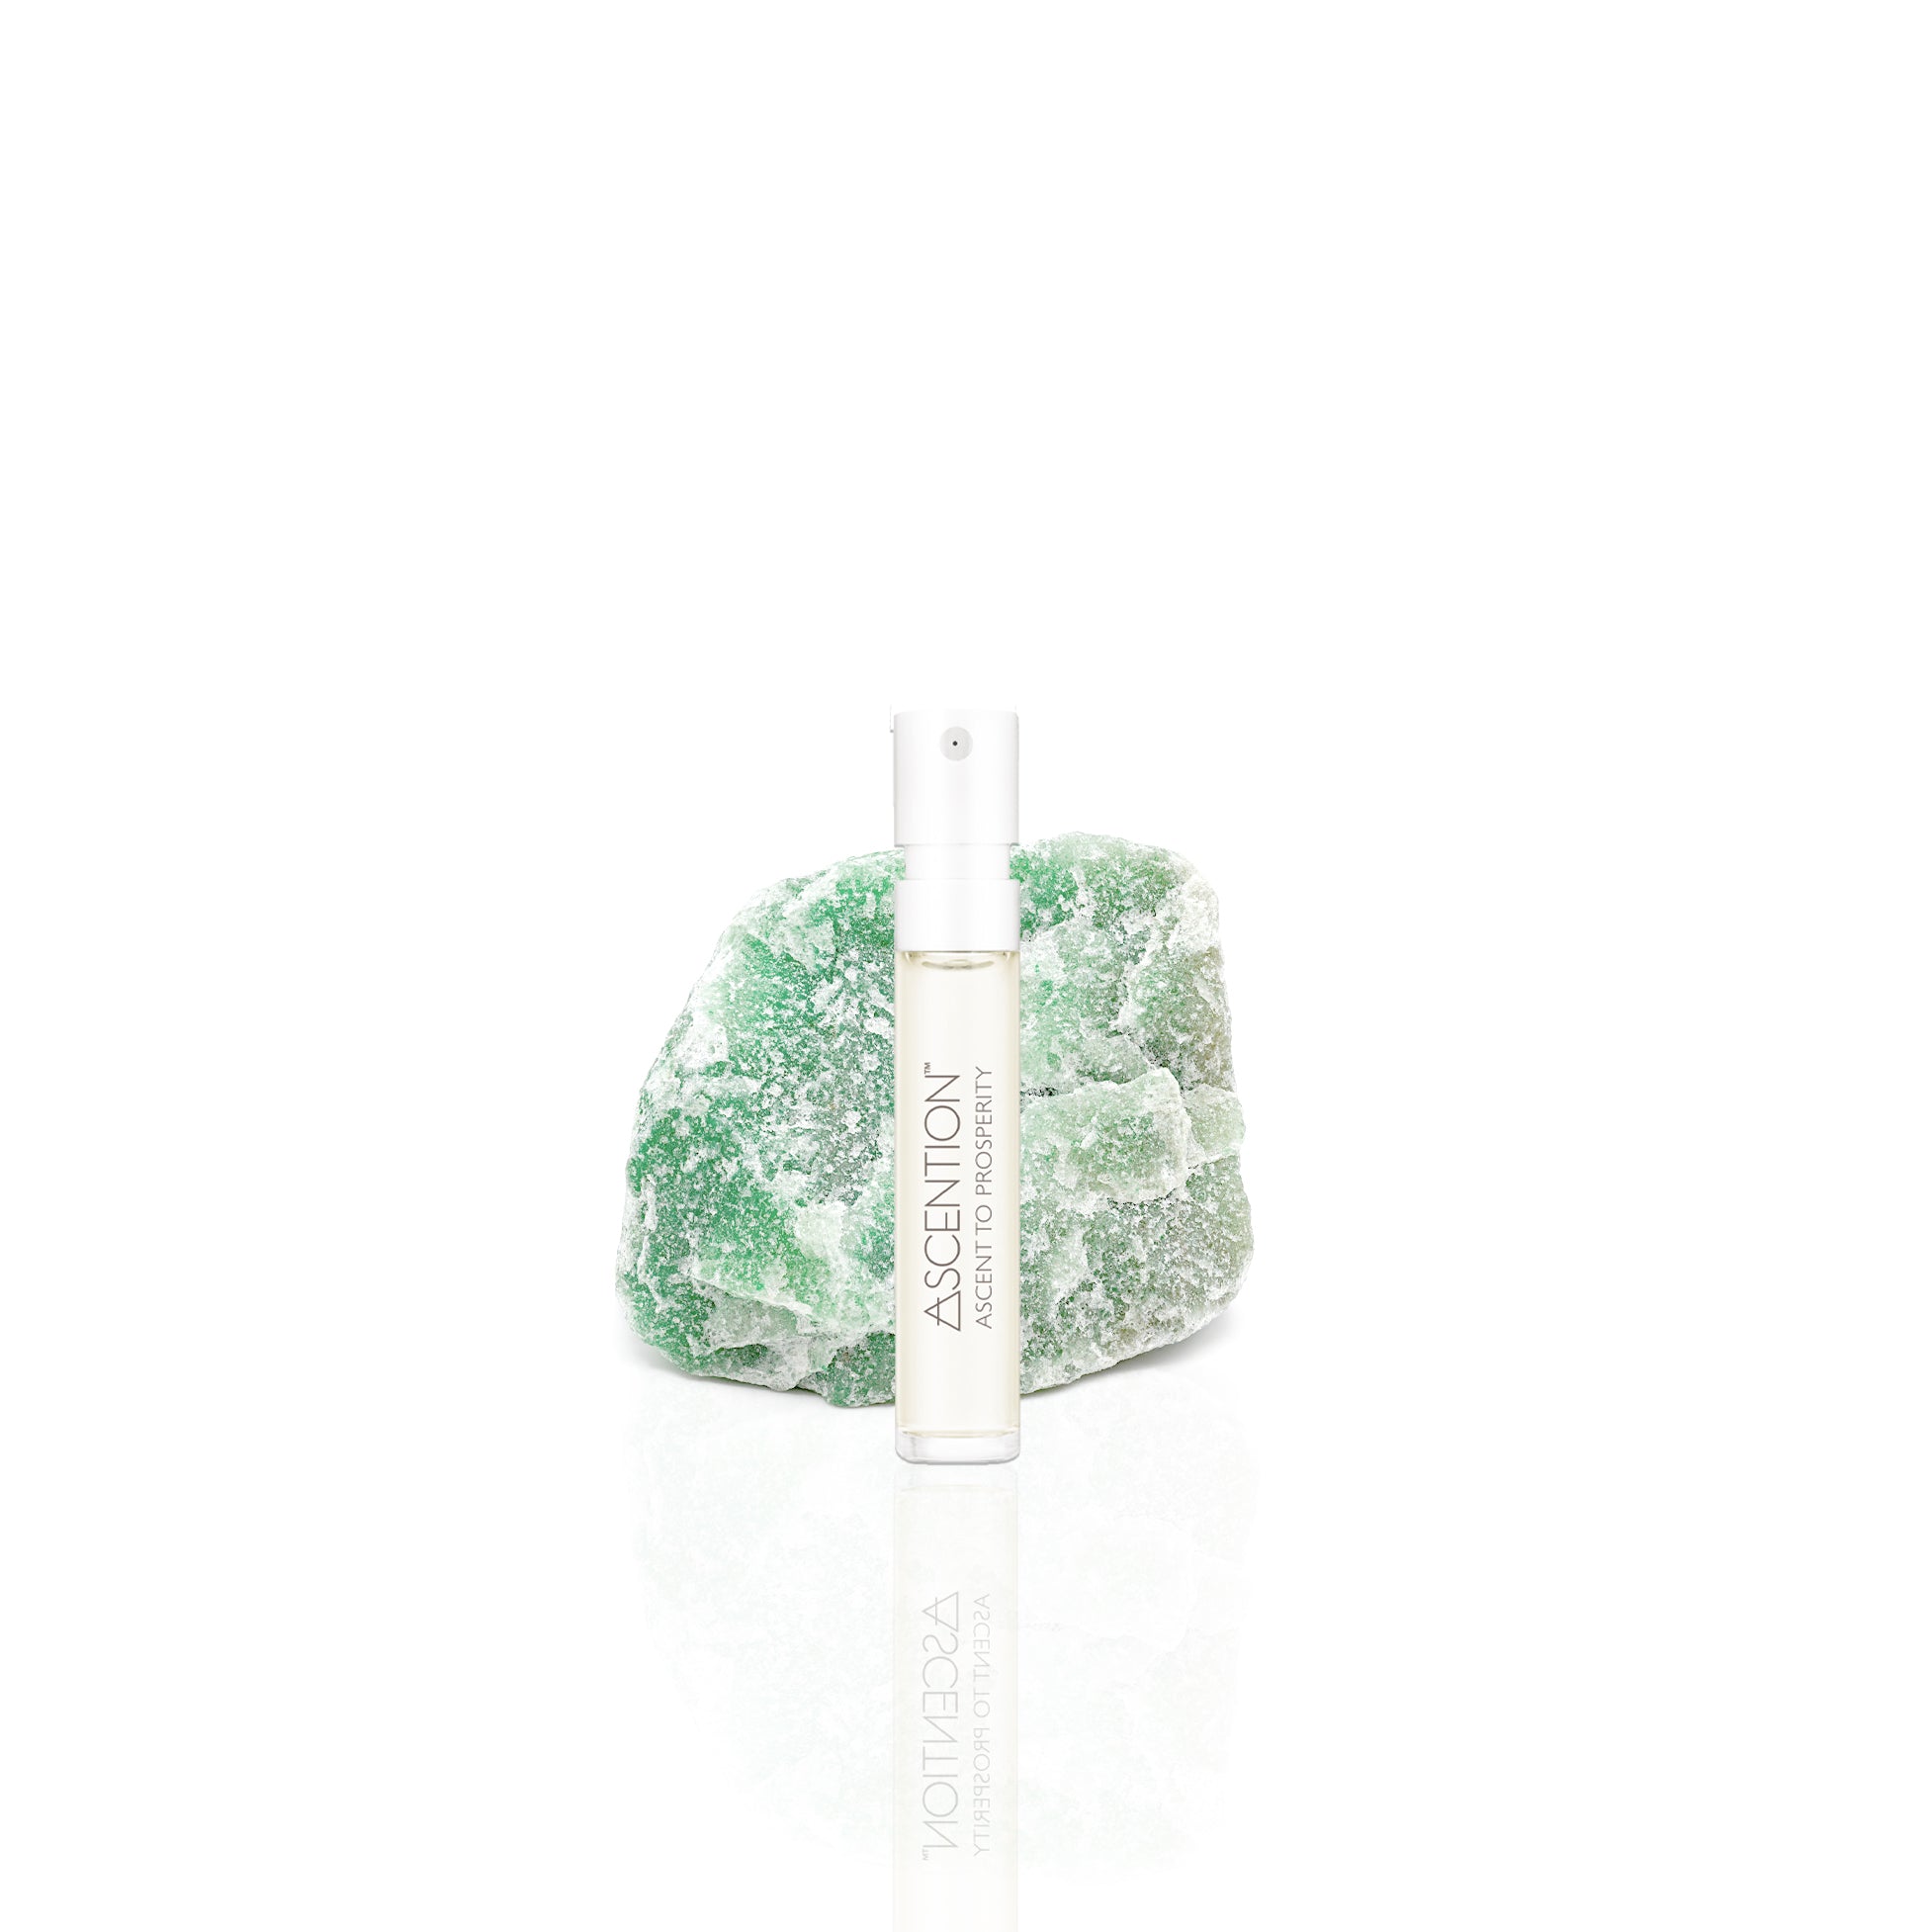 Ascent to Prosperity with Green Aventurine crystal, scent with intent samples, don't just smell good, feel good. Discover, experience and manifest with scent resonates with you. Ascention is elevating the clean fragrance experience into wellness.